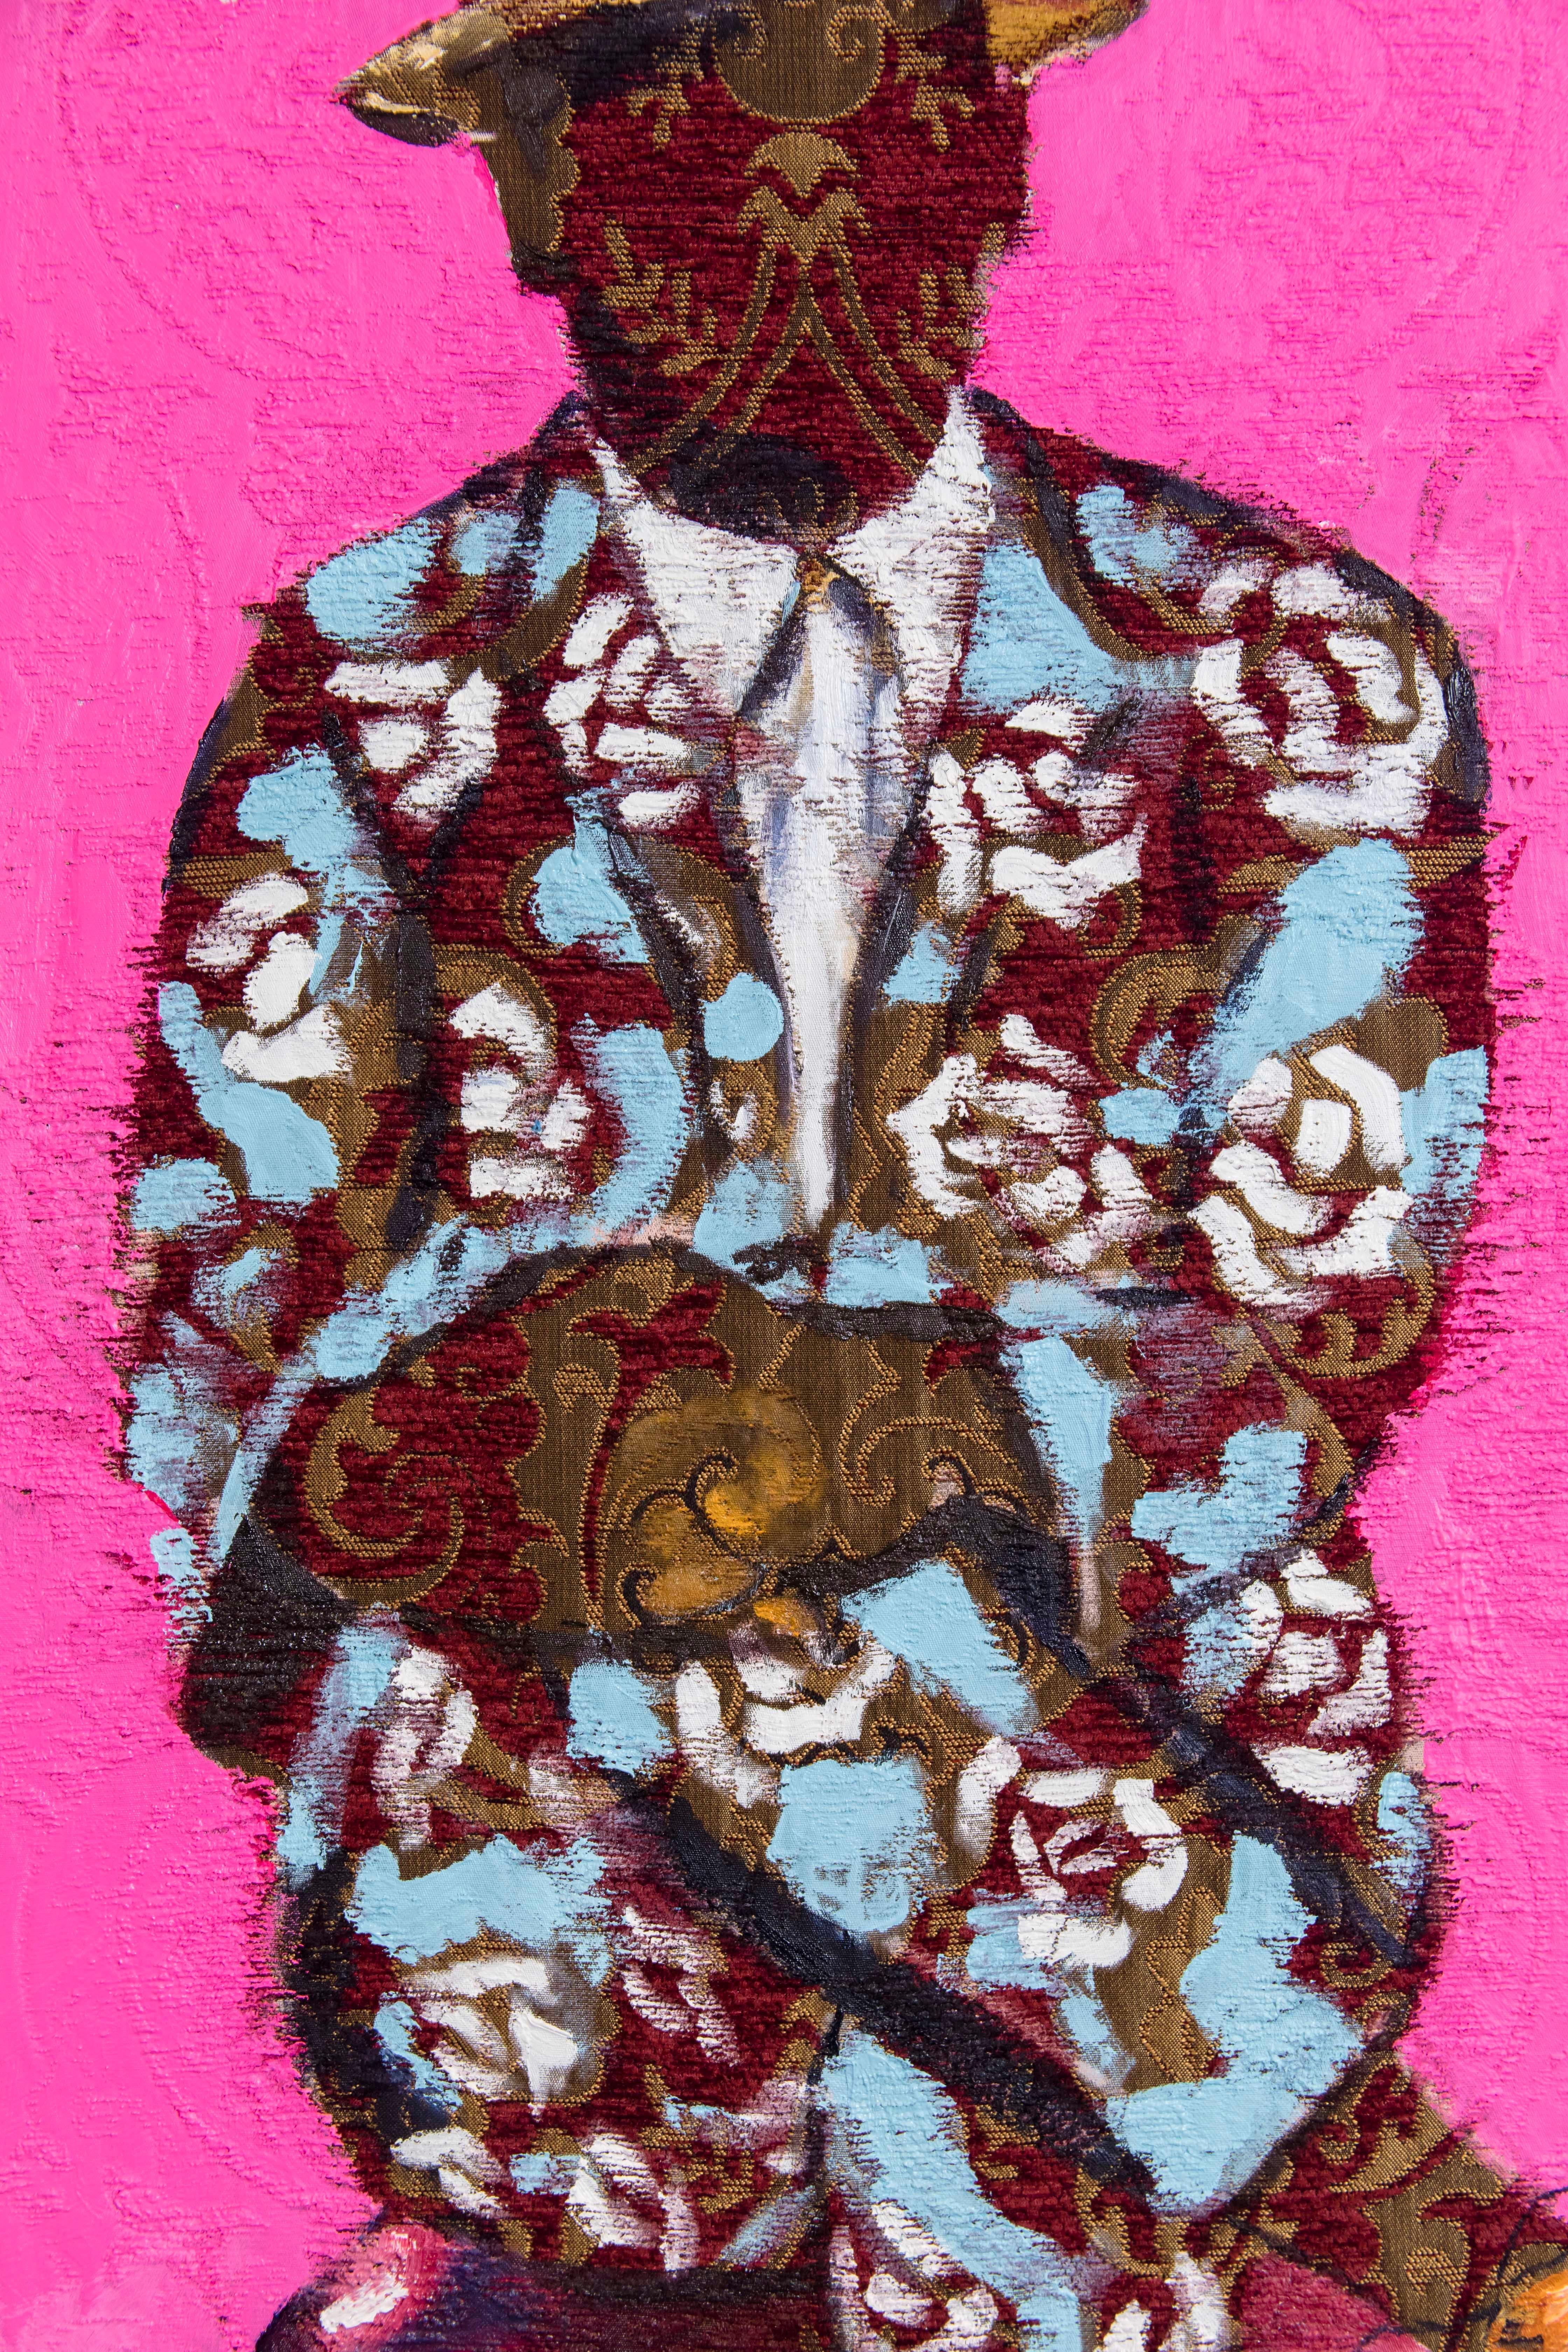 HIS FLOWERS - Portrait Painting on Fabric, Pink, Blue, Floral 2